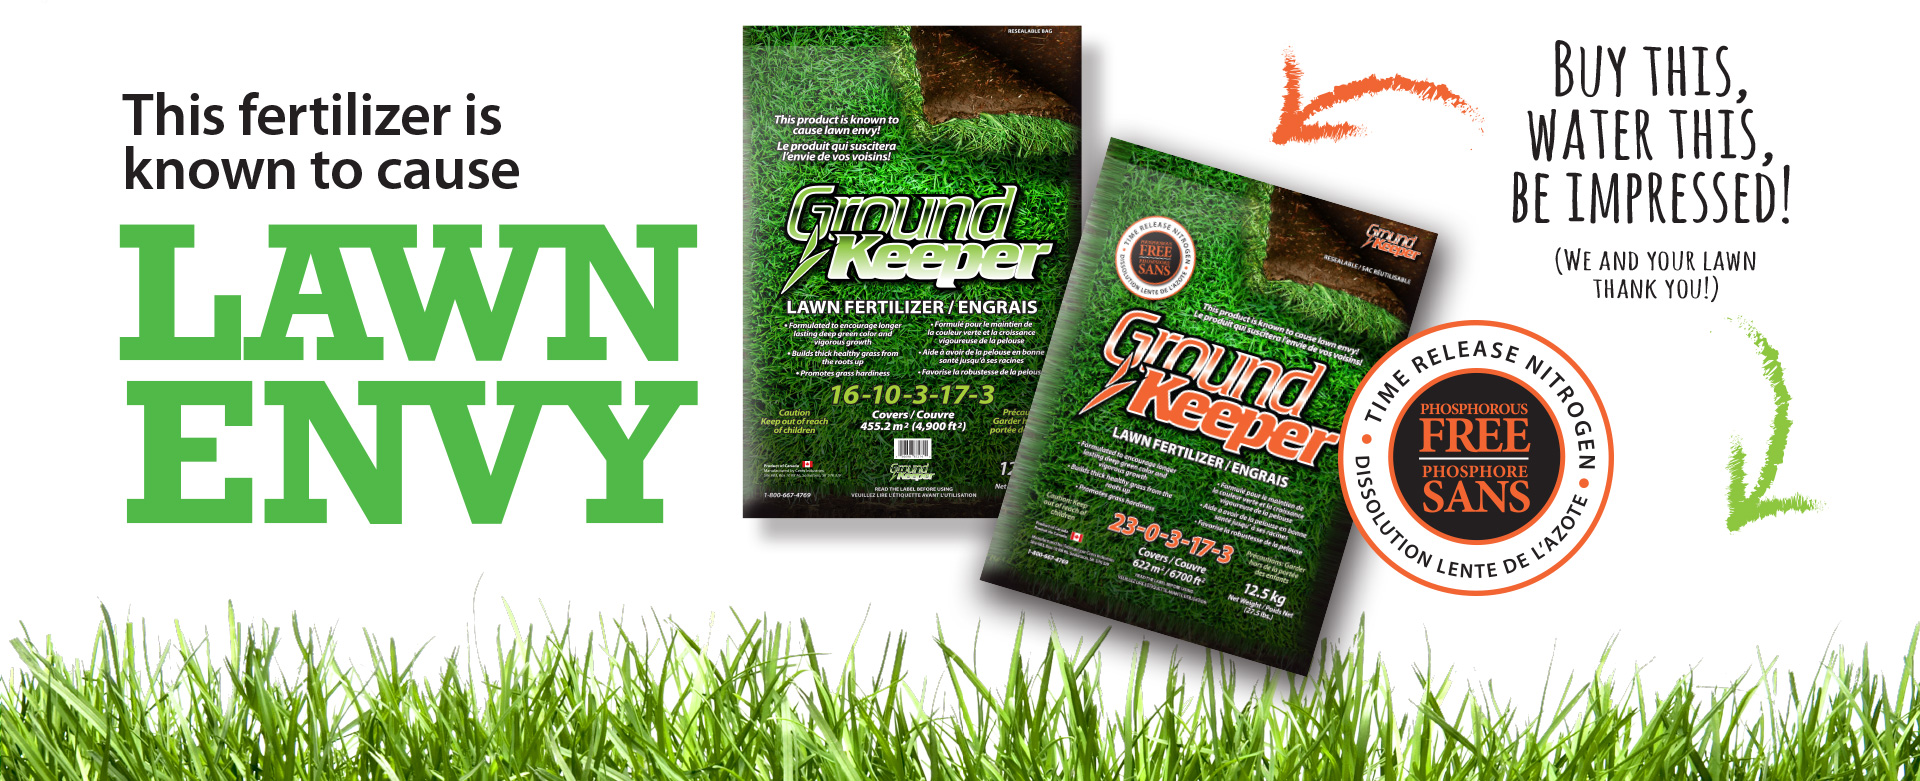 GroundKeeper - This fertilizer is known to cause lawn envy